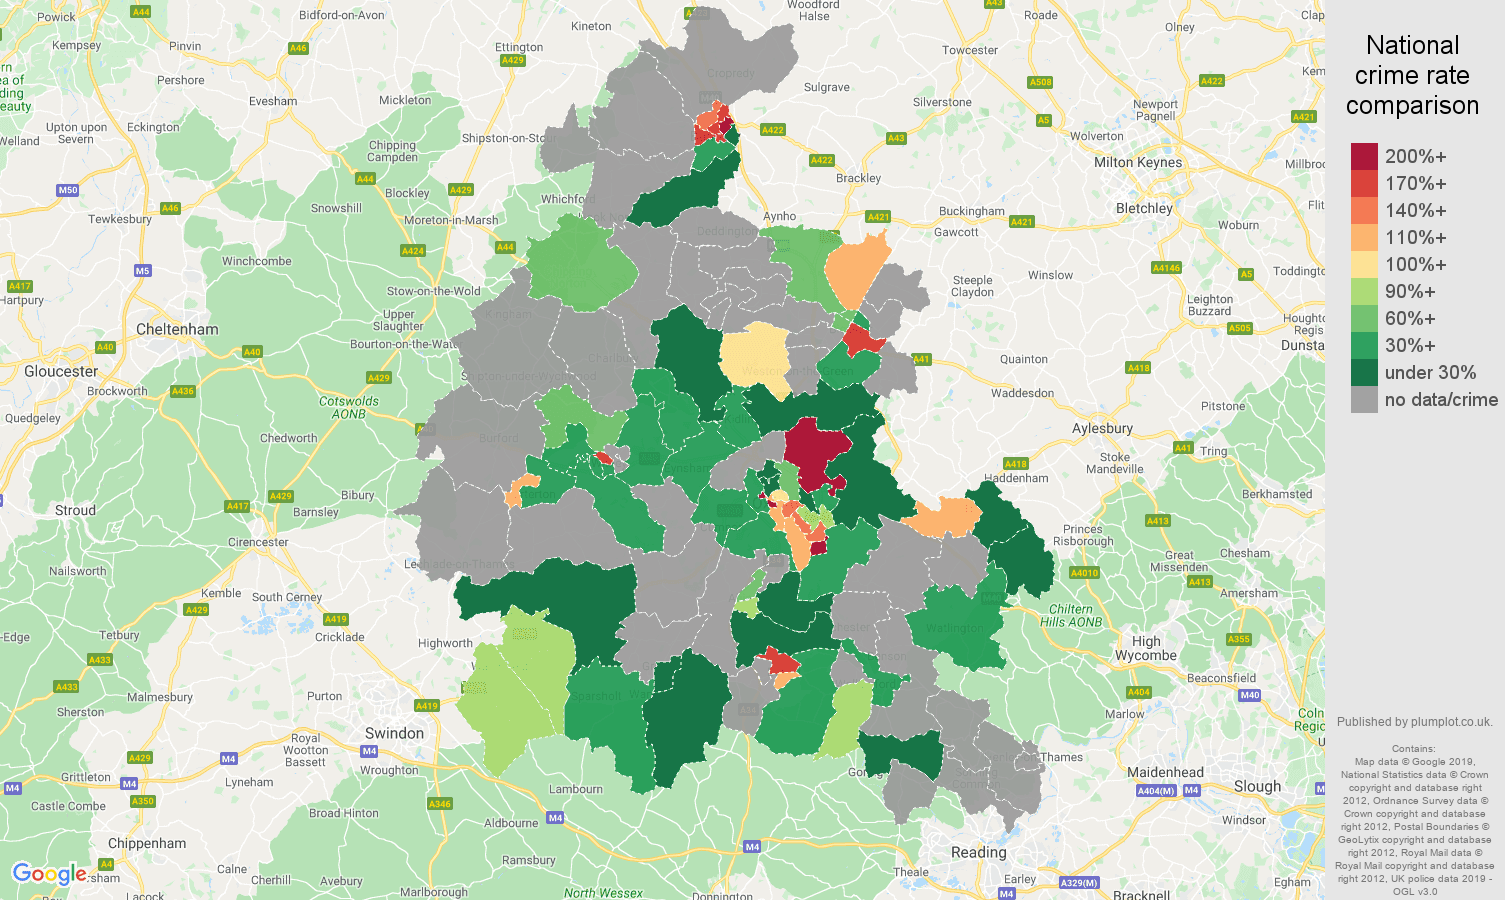 Oxfordshire possession of weapons crime rate comparison map